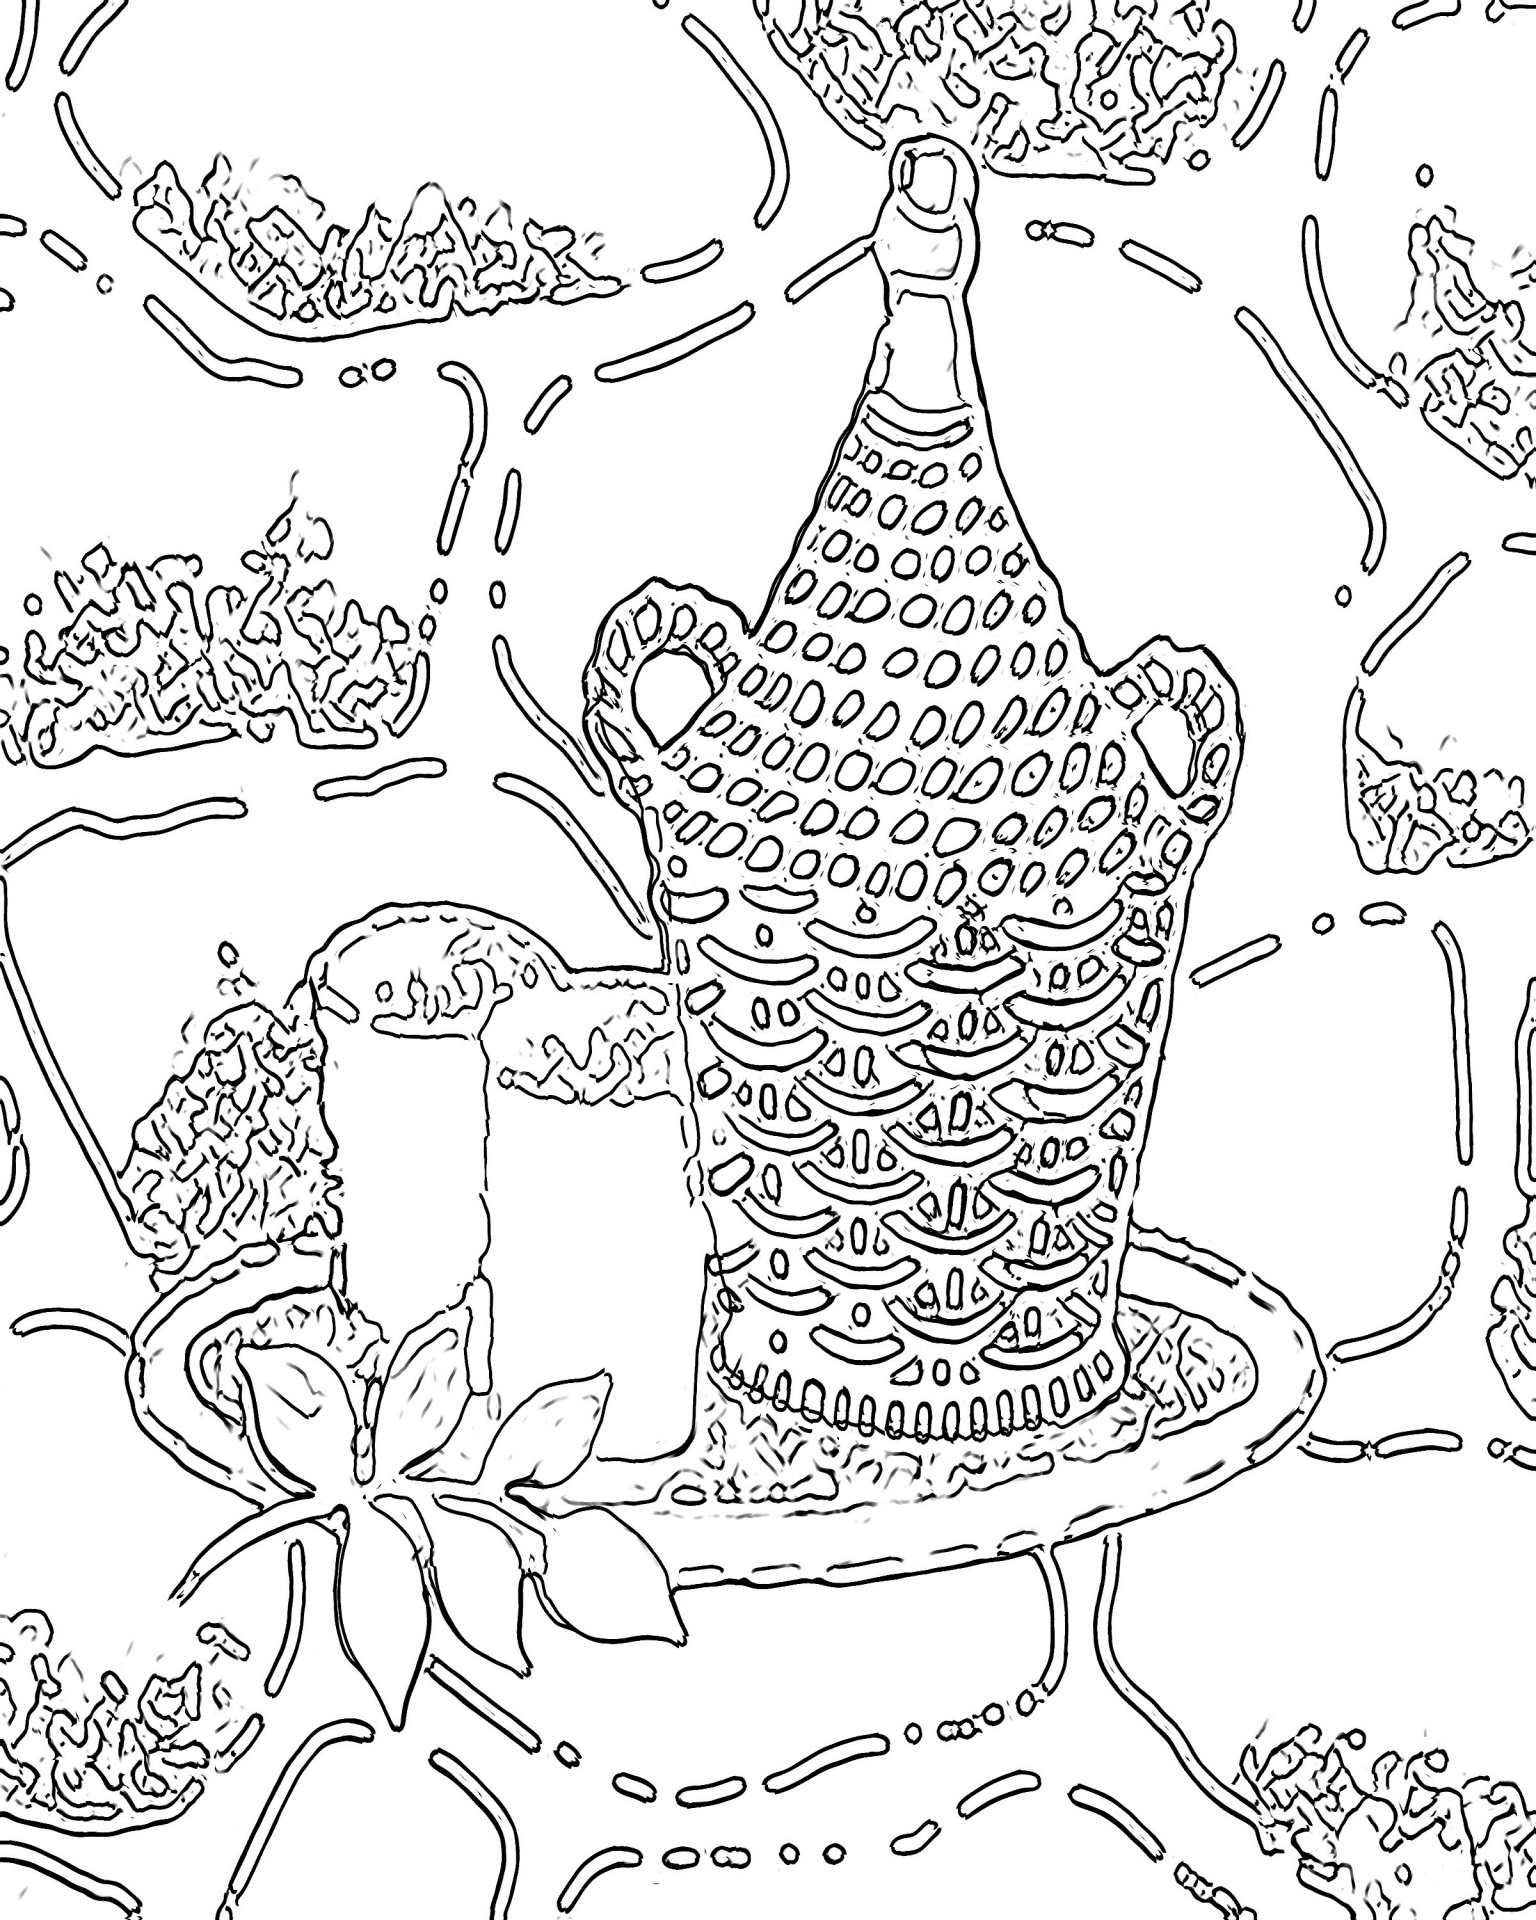 Free Printable Abstract Coloring Pages For Adults Coloring Wallpapers Download Free Images Wallpaper [coloring536.blogspot.com]